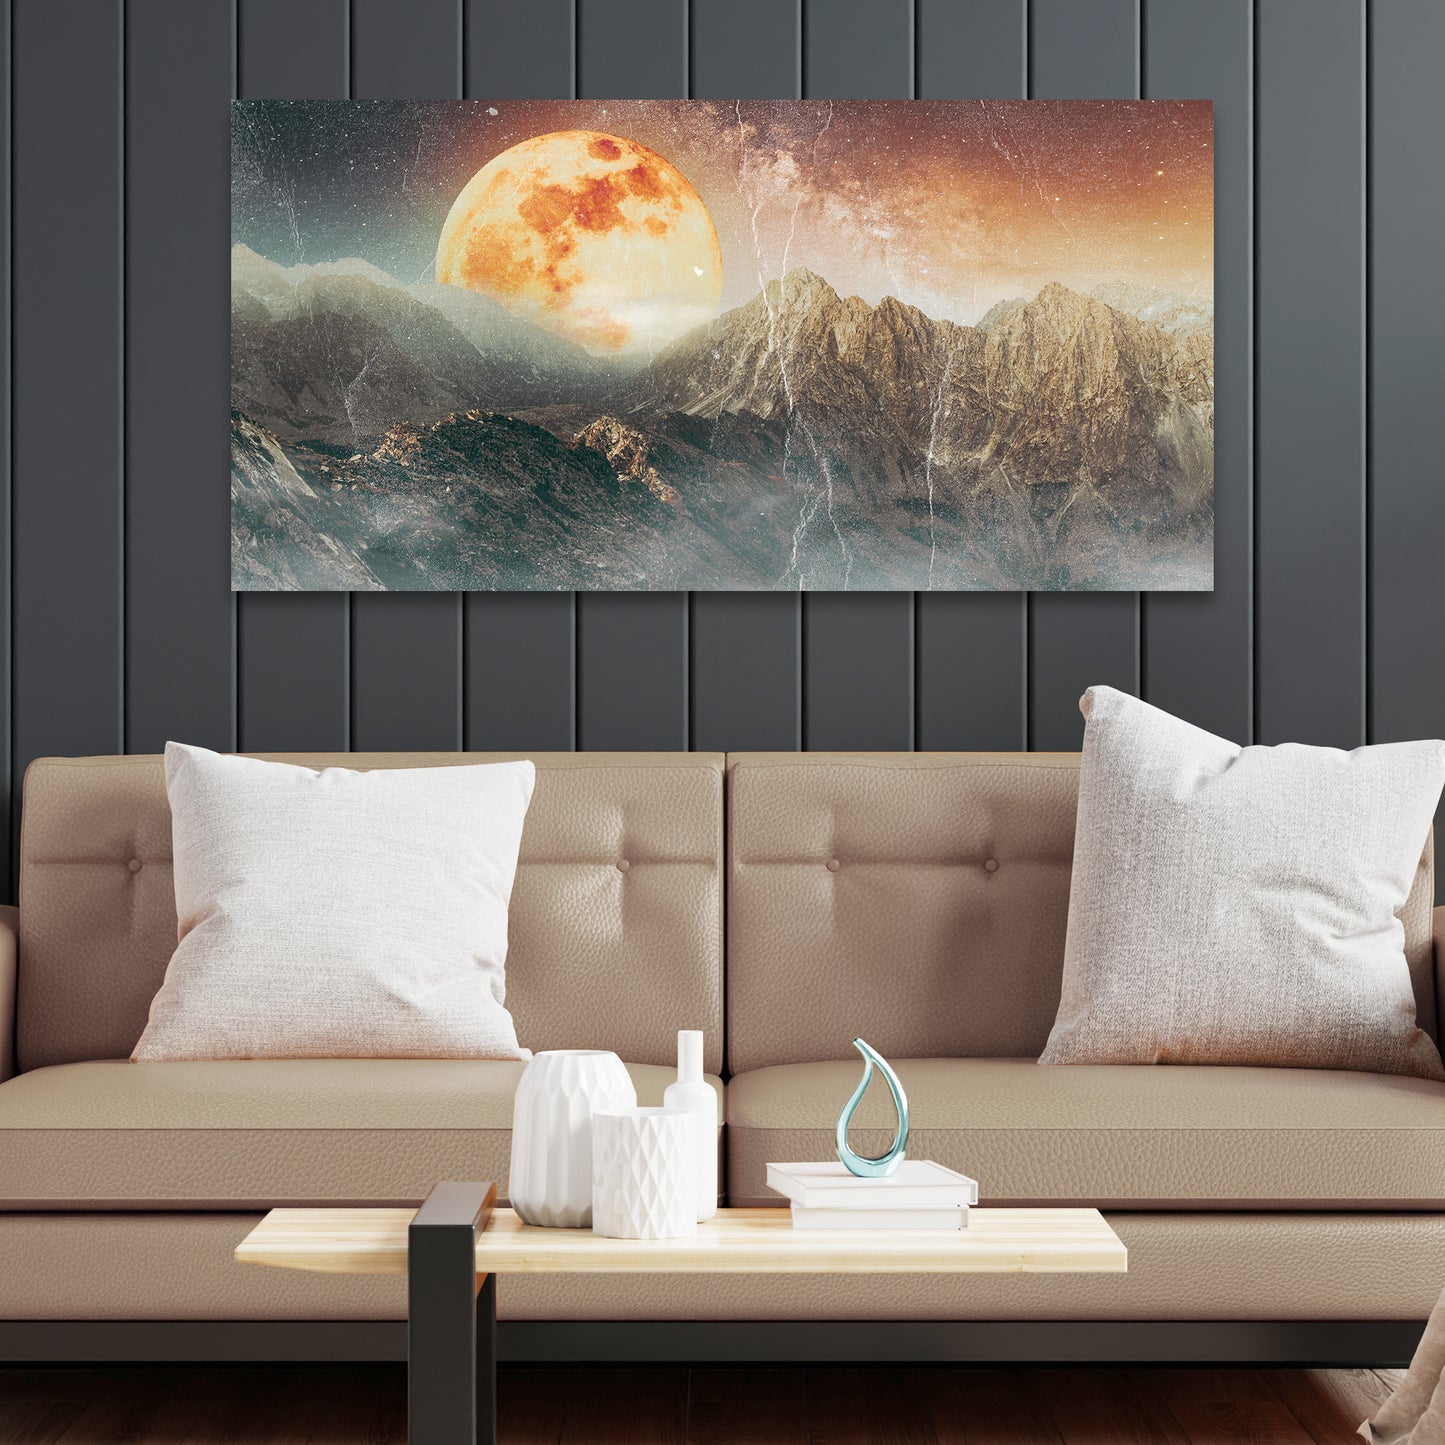 Orange Full Moon Behind Mountain Range Canvas Wall Art - Image by Tailored Canvases